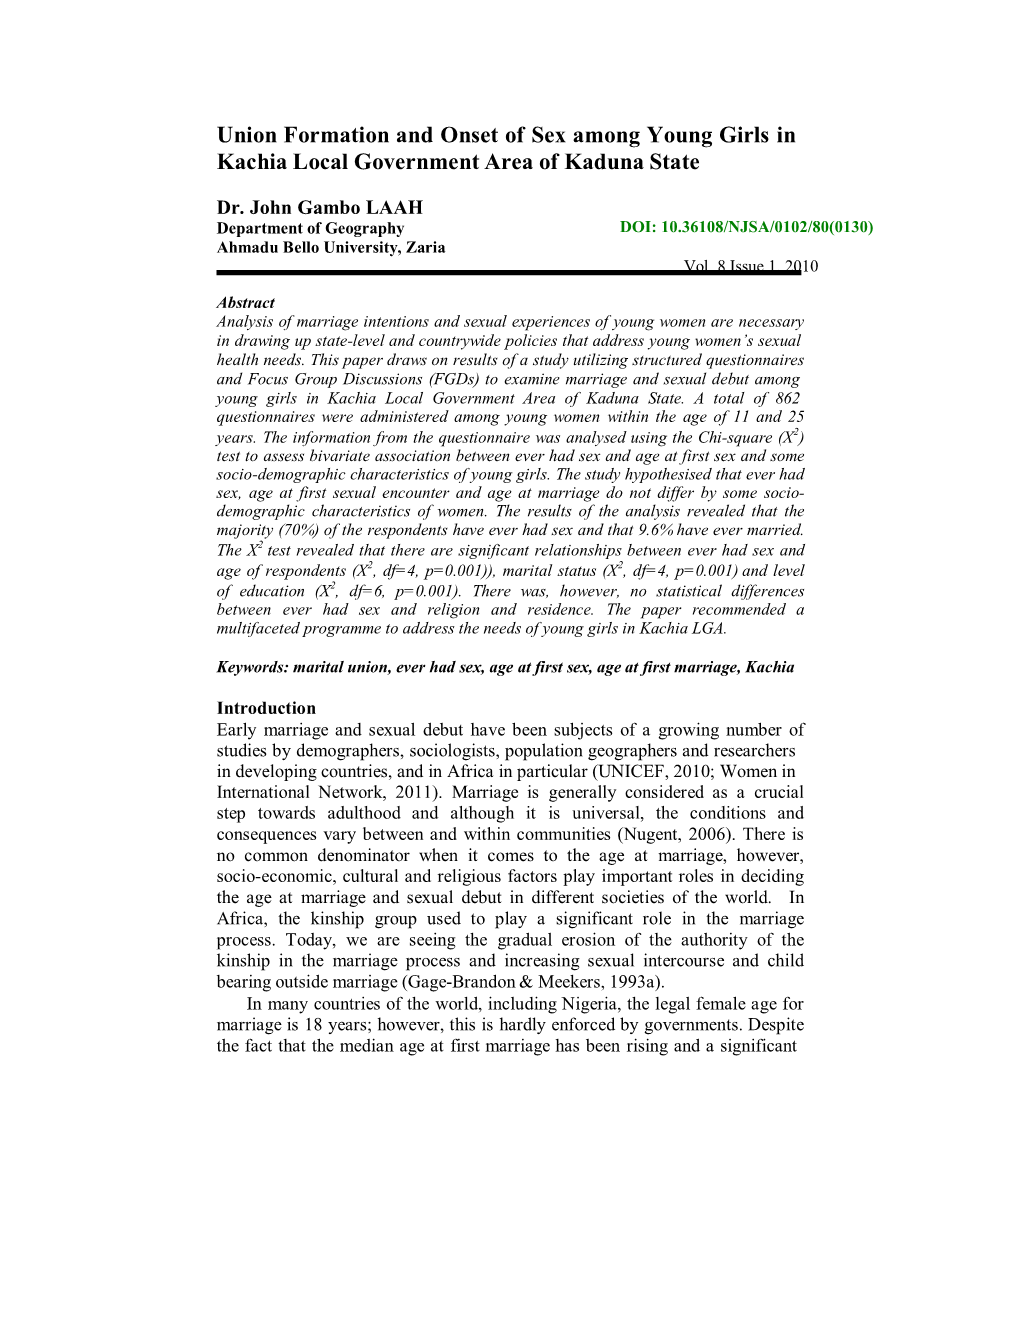 Union Formation and Onset of Sex Among Young Girls in Kachia Local Government Area of Kaduna State